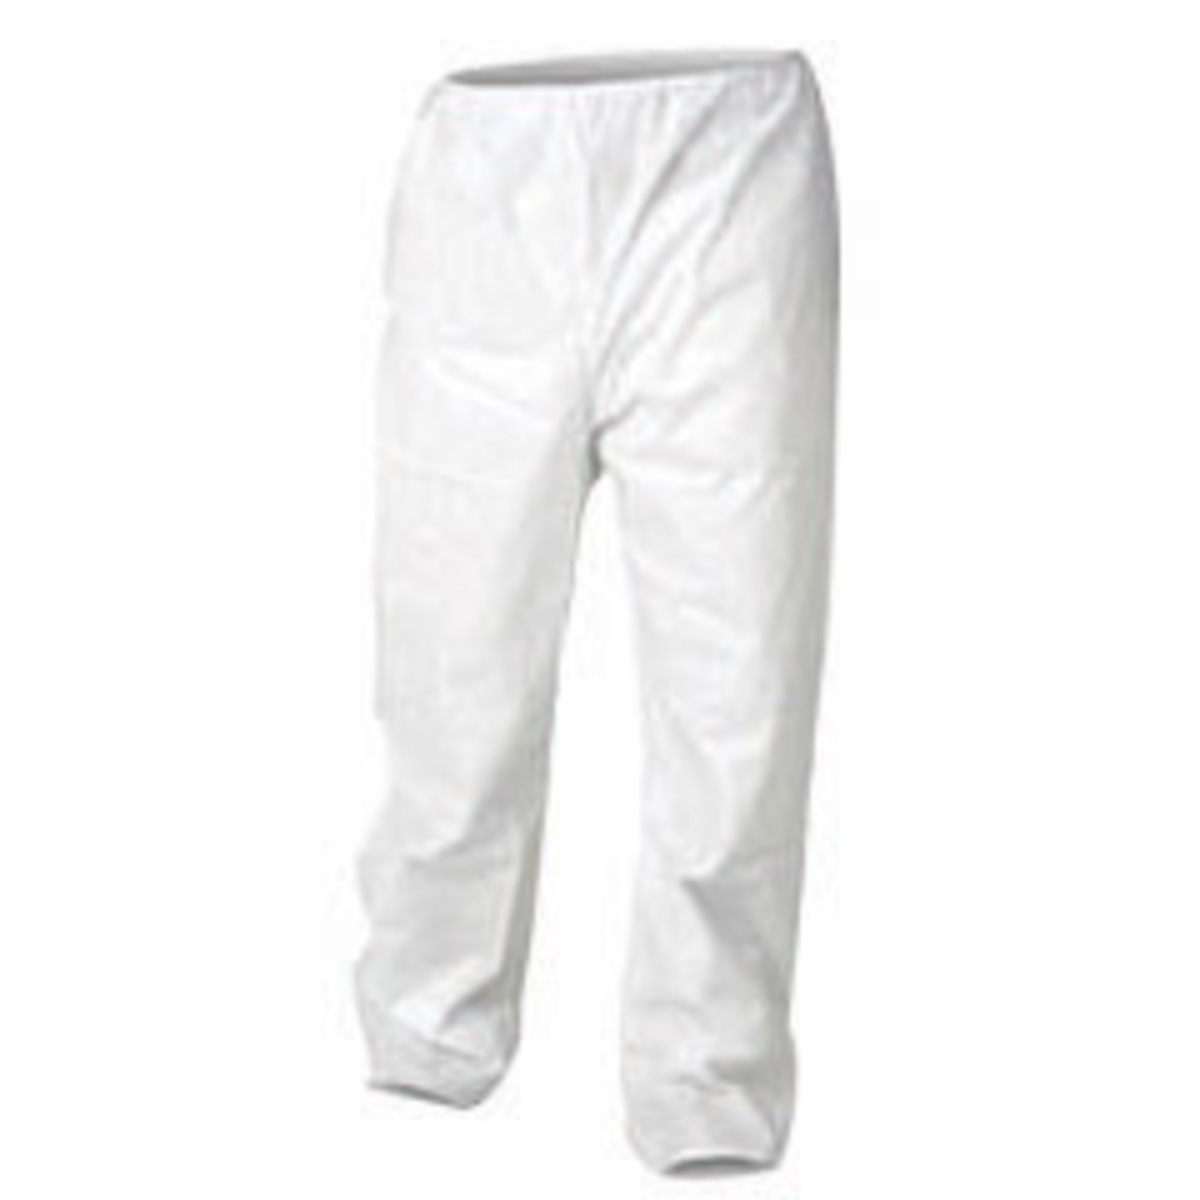 Kimberly-Clark Professional™ Large White KleenGuard™ A20 SMS Disposable Pants (Availability restrictions apply.)